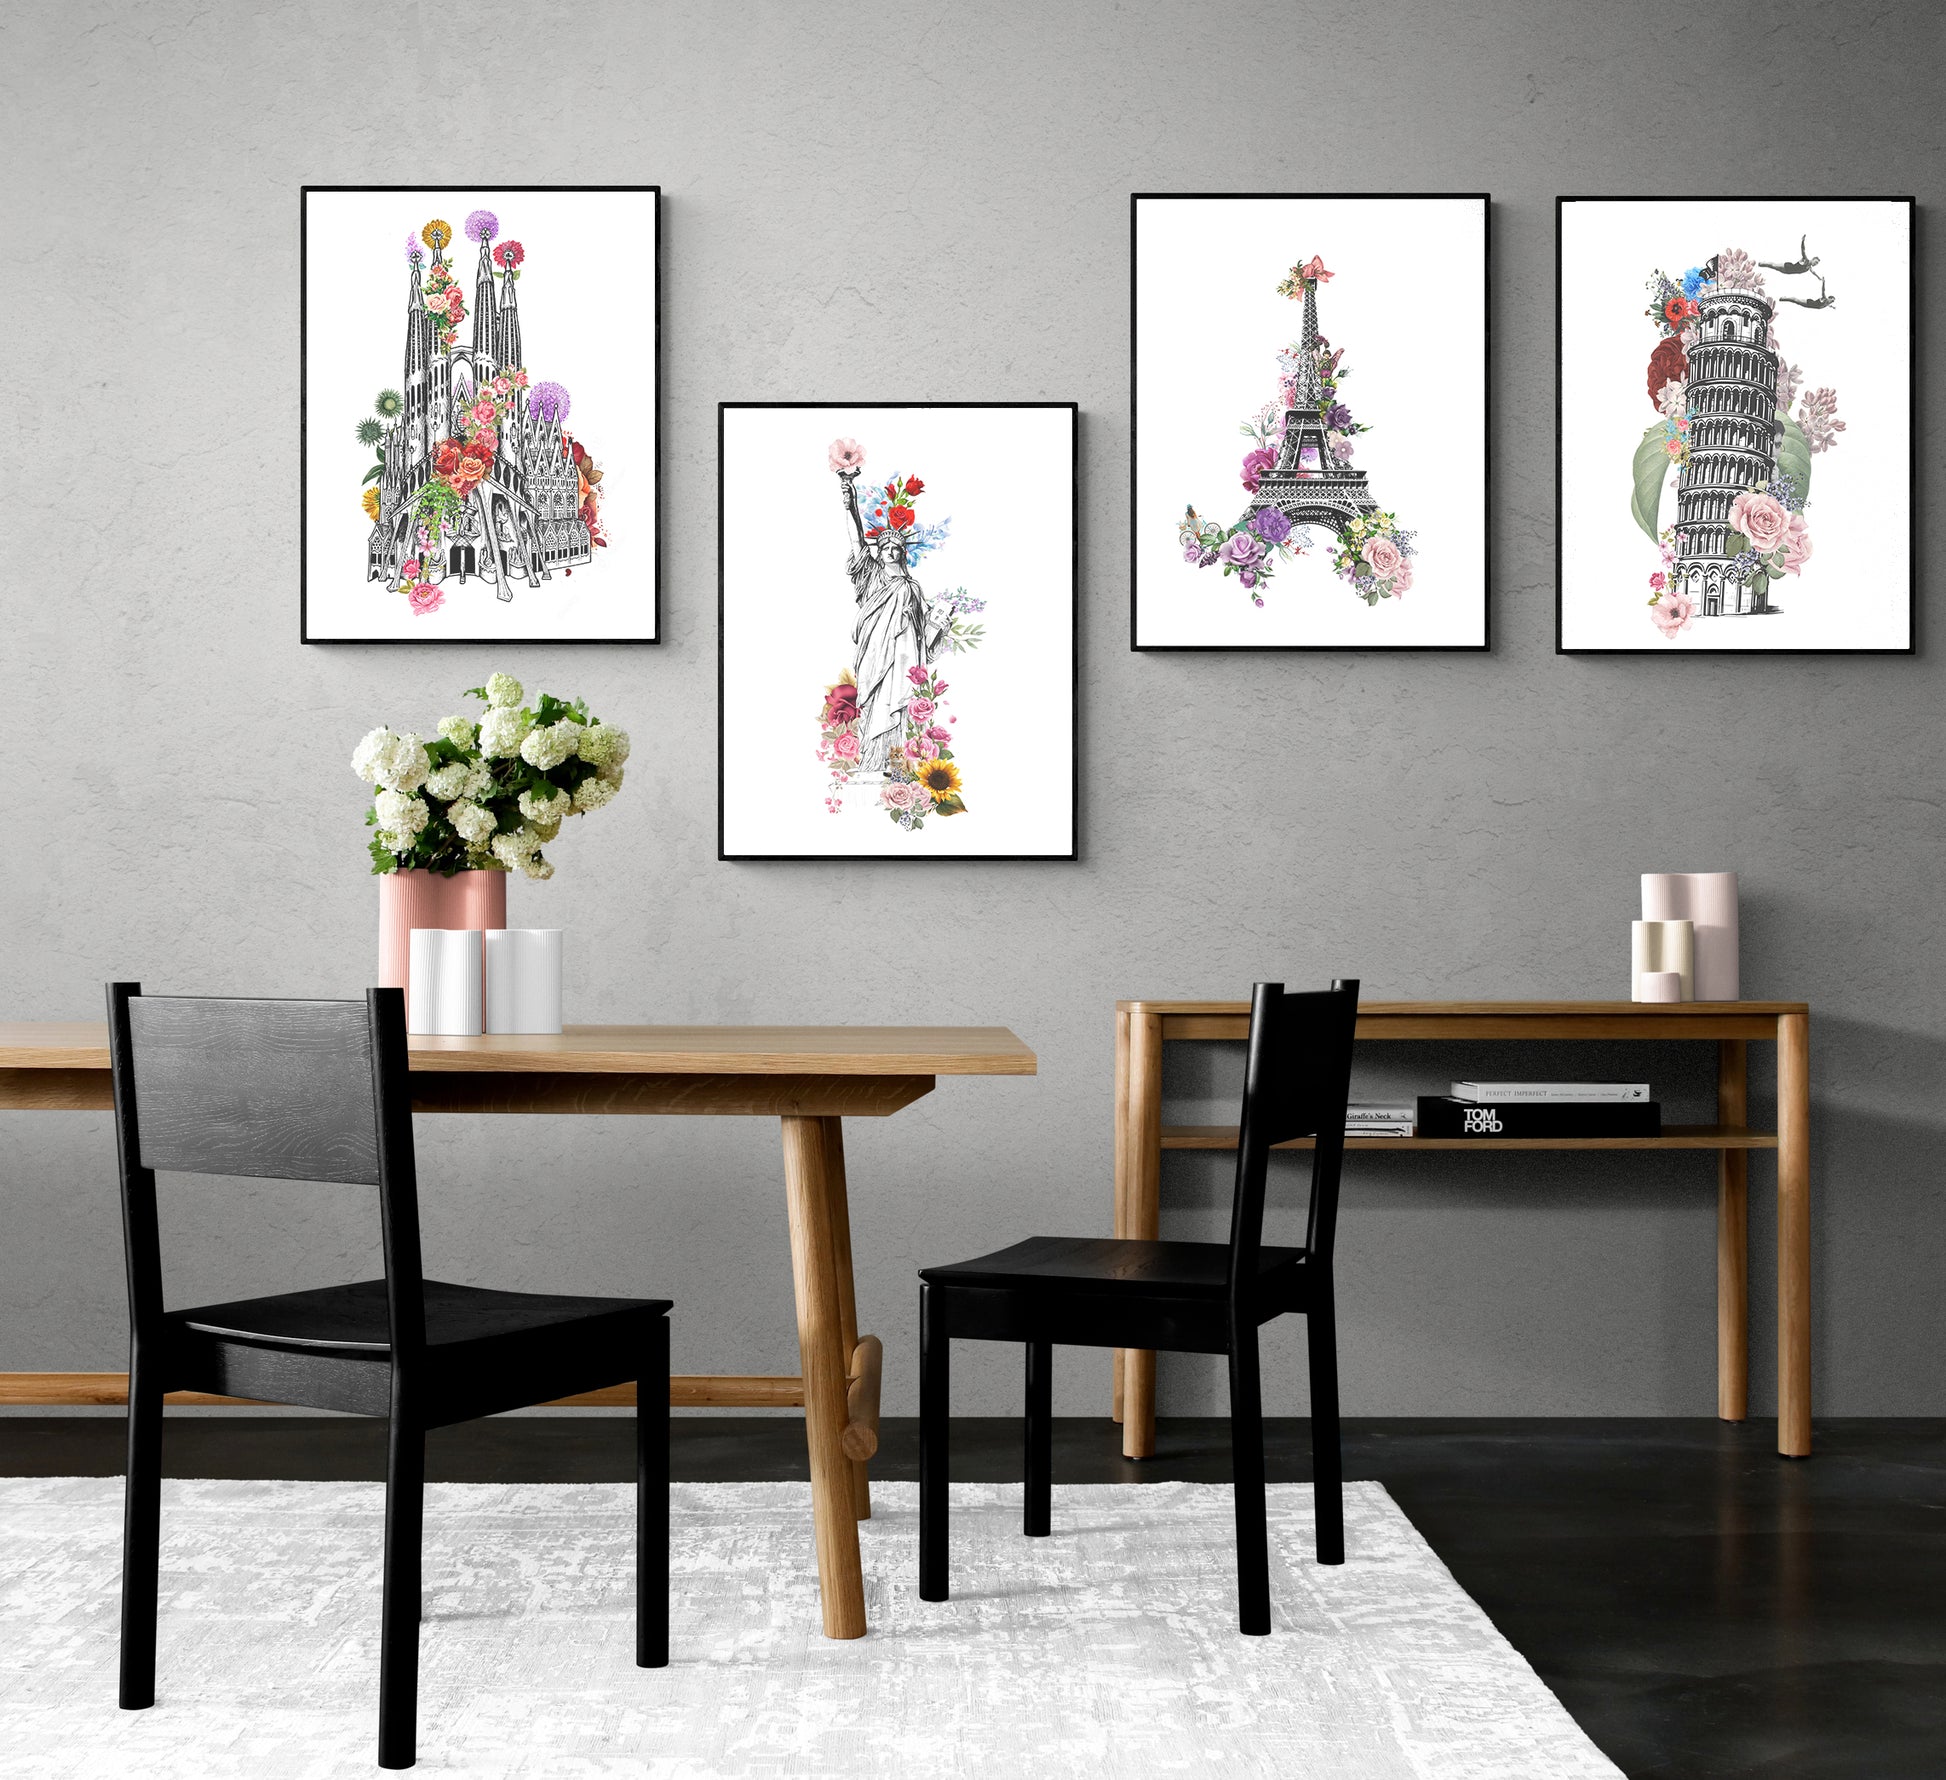 This Pisa Italy Flowers Poster features a beautiful arrangement of human anatomy in art, with monuments from Pisa in Italy. It's perfect for home or office décor, with bright colors and intricate detail that will stand out in any space. Anatomy posters bring the beauty of human anatomy to life, making it a great choice for artists and medical students, alike.